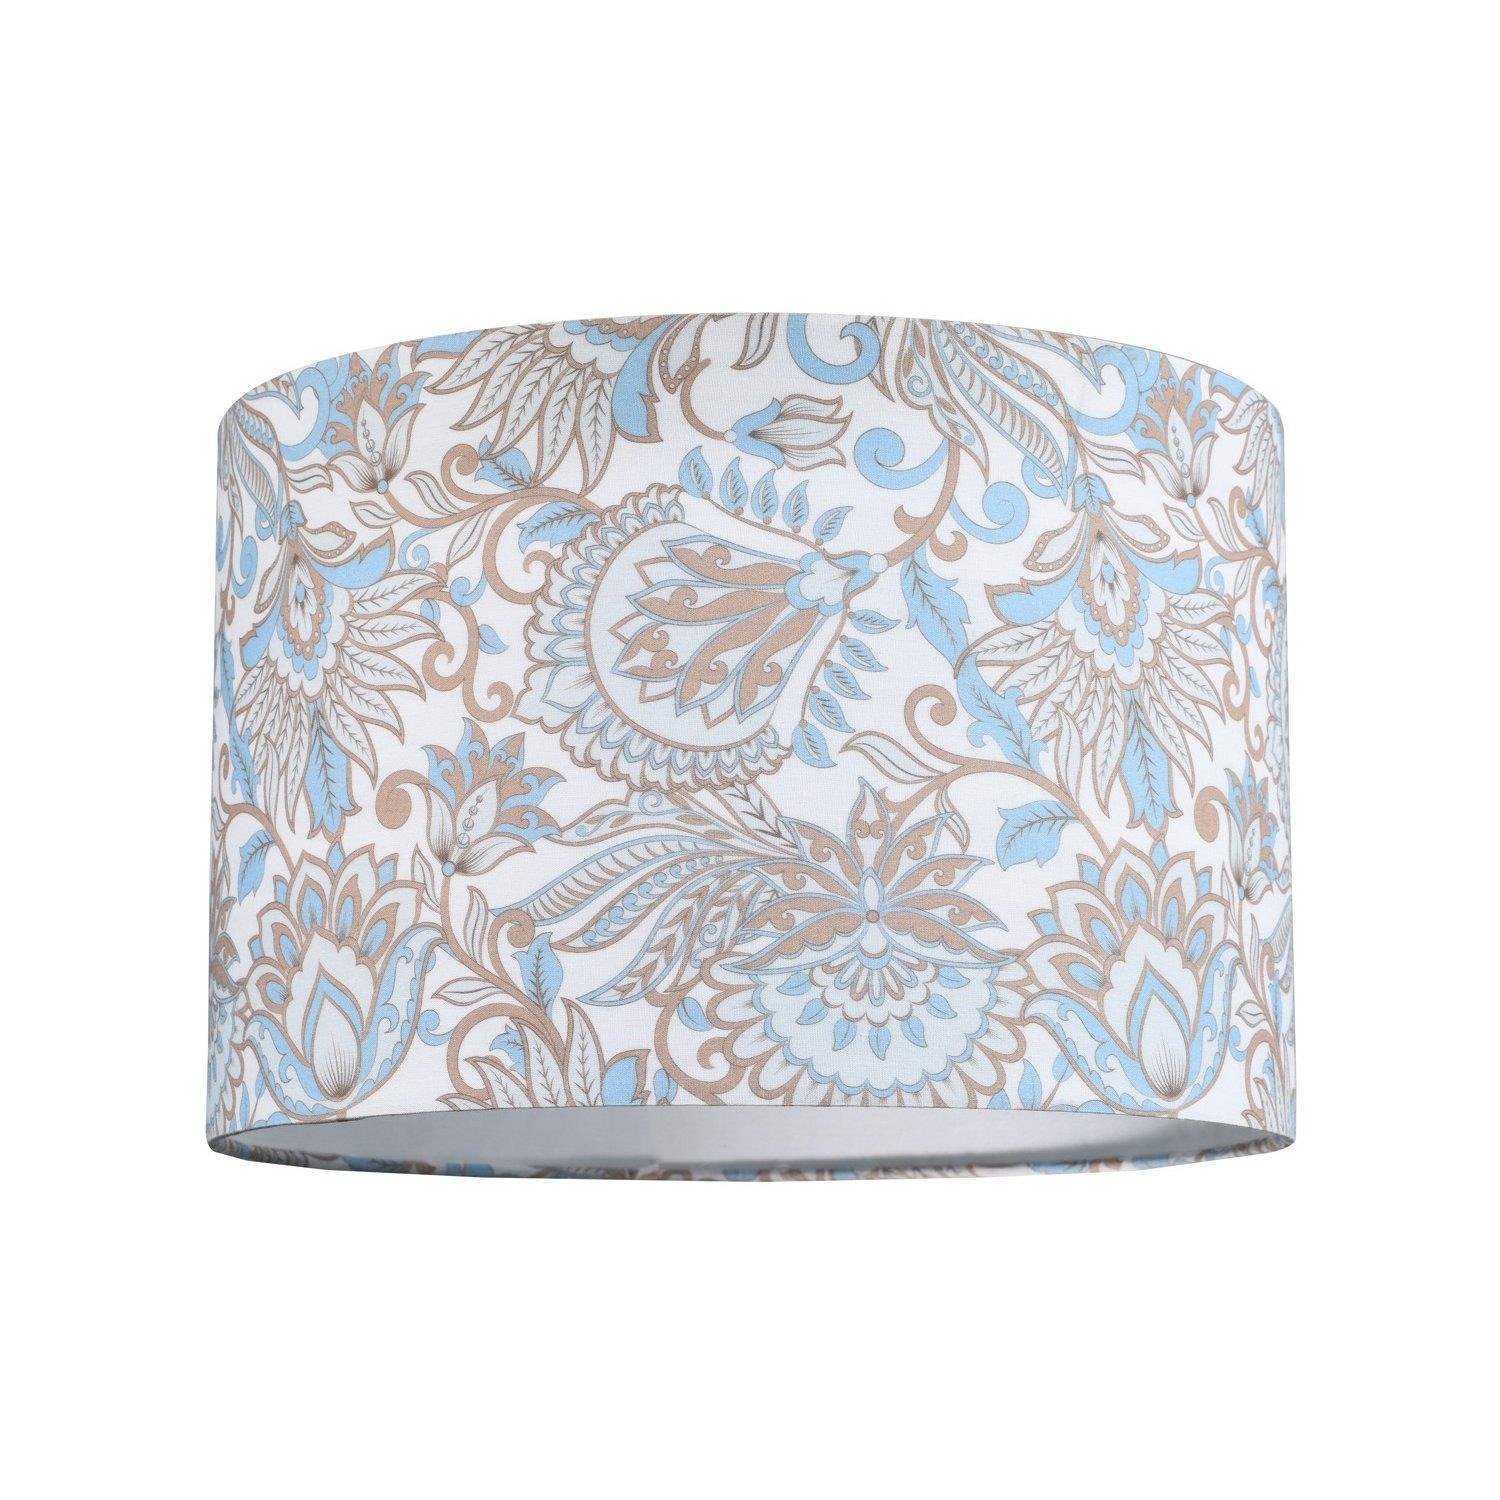 Paisley Floral Print Cotton Fabric Lamp Shade in Sky Blue with White Lining - image 1